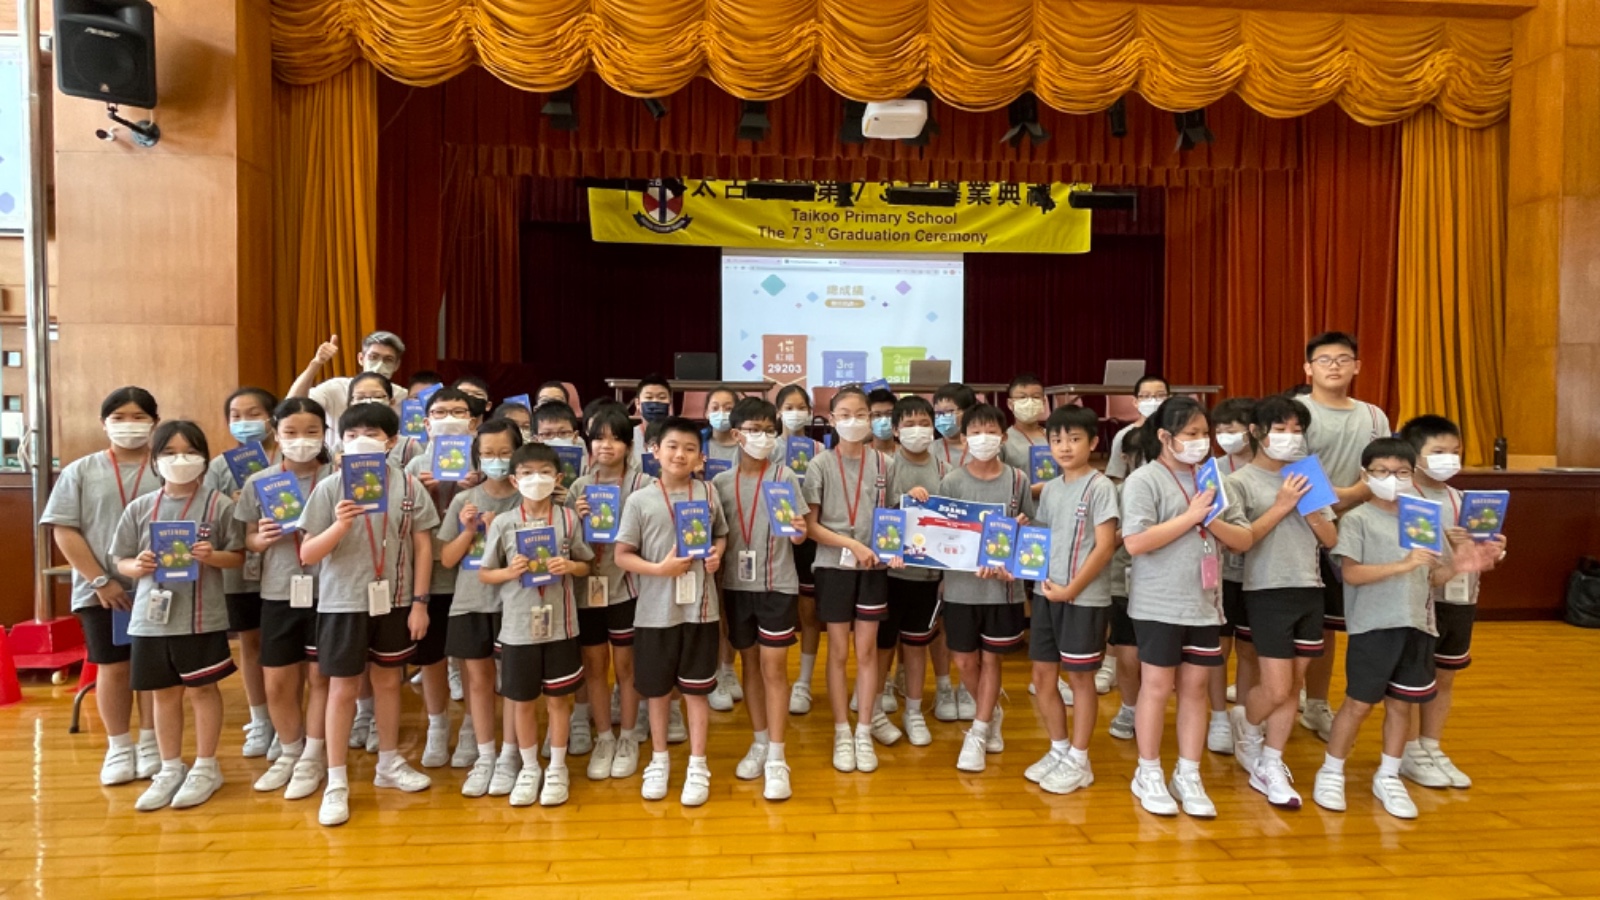 MAD Maths & Problem-solving Fun Day - Taikoo Primary School